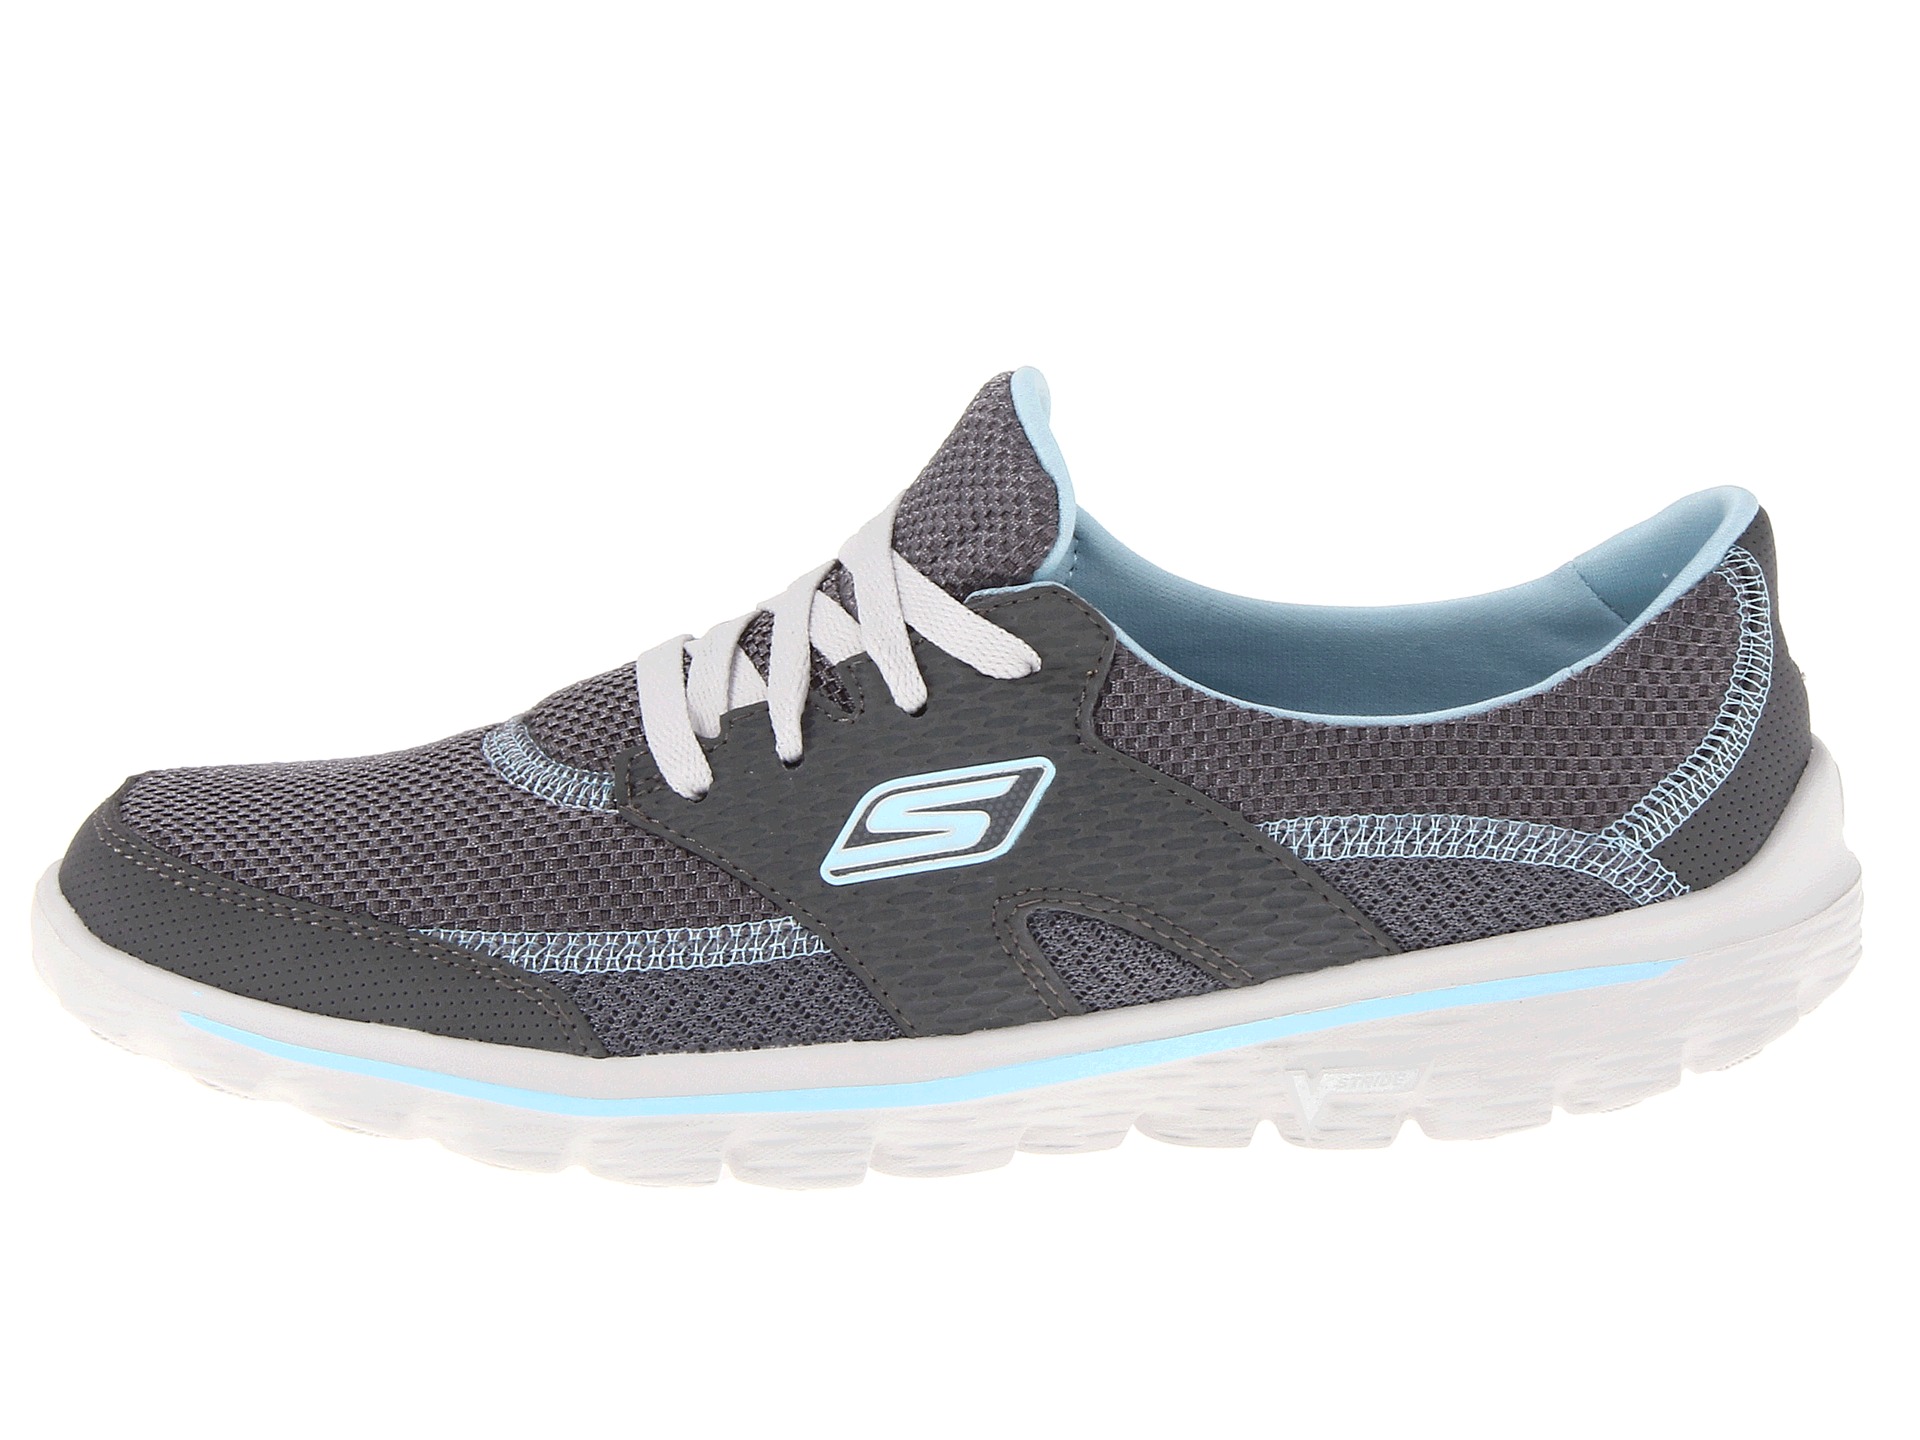 Skechers Performance Gowalk 2 Stance | Shipped Free at Zappos